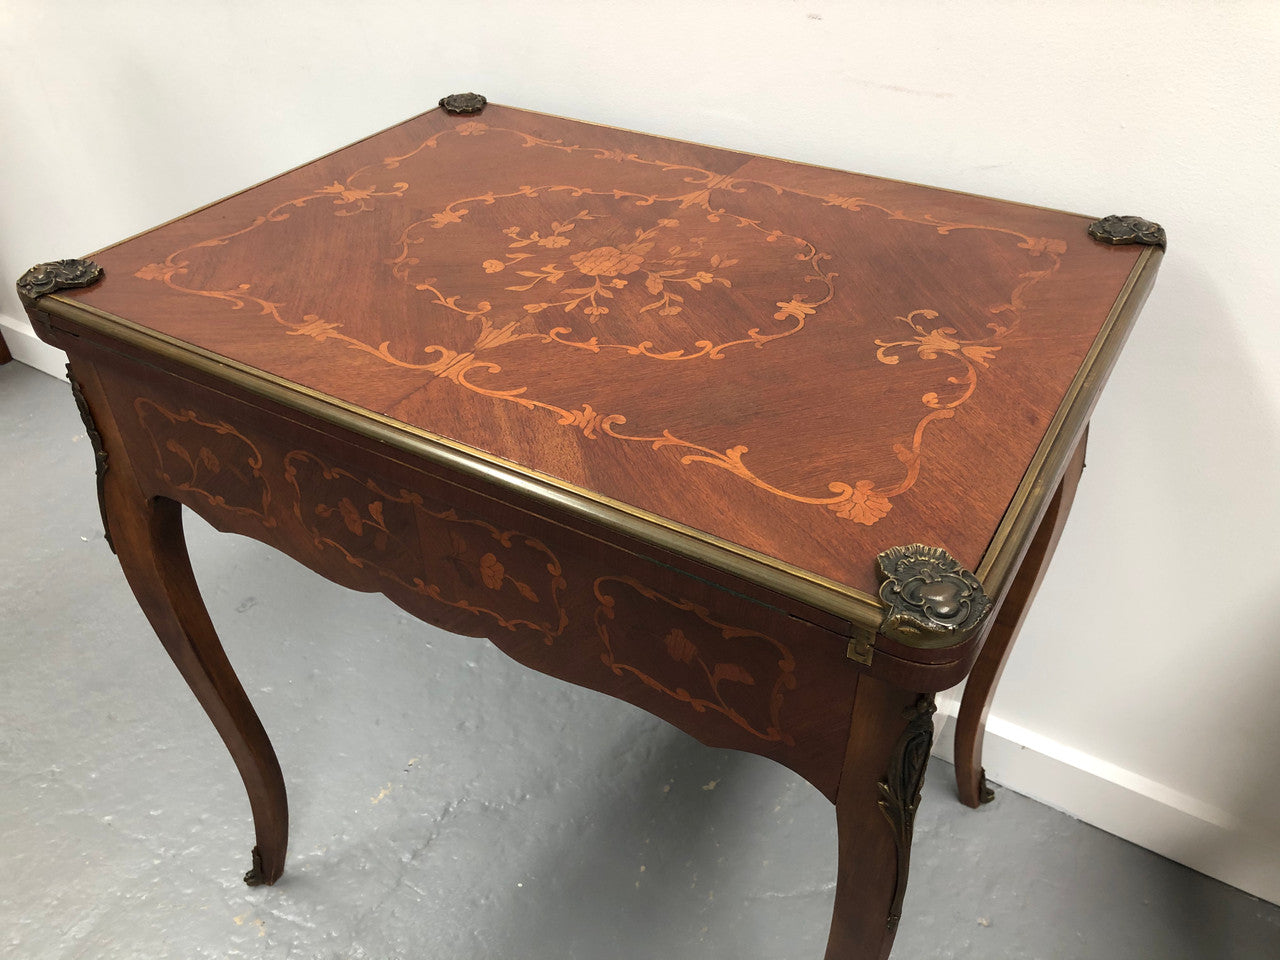 Beautiful french inlaid games table which includes internal drawers and bronze mounts. Internal drawers have counters and cards included.